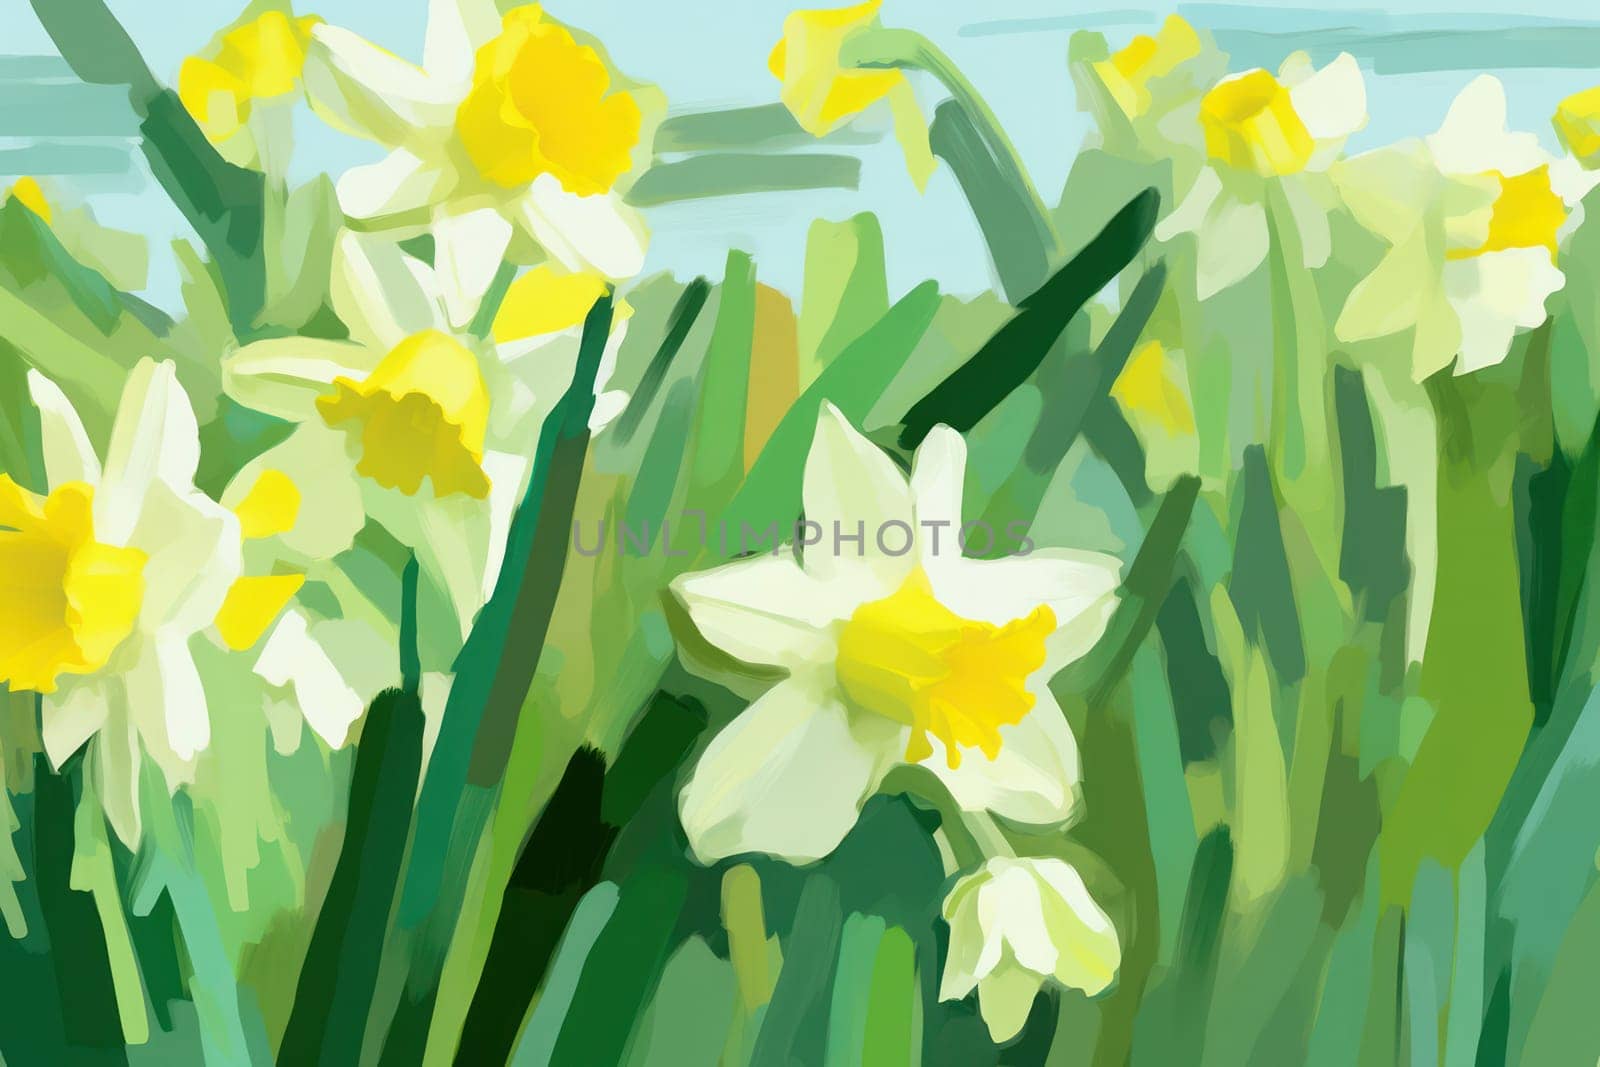 Yellow Daffodil in Nature's Blossoming Beauty: A Garden's Vibrant Spring Bouquet on a Sunny Meadow.